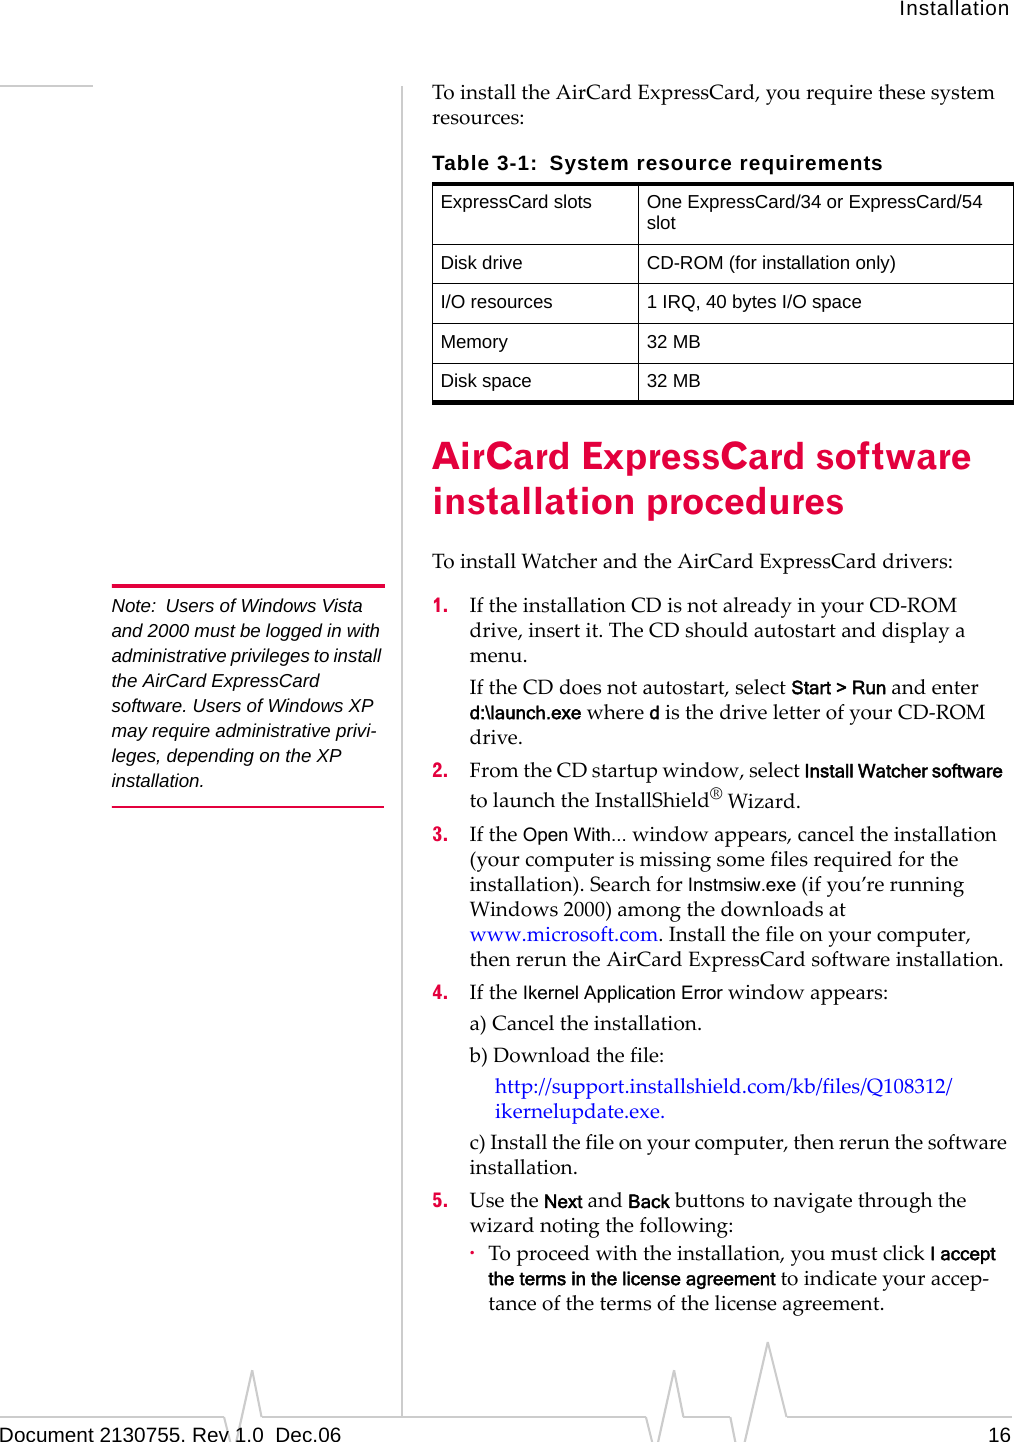 InstallationDocument 2130755. Rev 1.0  Dec.06 16ToinstalltheAirCardExpressCard,yourequirethesesystemresources:AirCard ExpressCard software installation proceduresToinstallWatcherandtheAirCardExpressCarddrivers:Note: Users of Windows Vista and 2000 must be logged in with administrative privileges to install the AirCard ExpressCard software. Users of Windows XP may require administrative privi-leges, depending on the XP installation.1. IftheinstallationCDisnotalreadyinyourCD‐ROMdrive,insertit.TheCDshouldautostartanddisplayamenu.IftheCDdoesnotautostart,selectStart &gt; Runandenterd:\launch.exewheredisthedriveletterofyourCD‐ROMdrive.2. FromtheCDstartupwindow,selectInstall Watcher softwaretolaunchtheInstallShield®Wizard.3. IftheOpen With...windowappears,canceltheinstallation(yourcomputerismissingsomefilesrequiredfortheinstallation).SearchforInstmsiw.exe(ifyou’rerunningWindows2000)amongthedownloadsatwww.microsoft.com.Installthefileonyourcomputer,thenreruntheAirCardExpressCardsoftwareinstallation.4. IftheIkernel Application Errorwindowappears:a)Canceltheinstallation.b)Downloadthefile:http://support.installshield.com/kb/files/Q108312/ikernelupdate.exe.c)Installthefileonyourcomputer,thenrerunthesoftwareinstallation.5. UsetheNextandBackbuttonstonavigatethroughthewizardnotingthefollowing:·Toproceedwiththeinstallation,youmustclickI accept the terms in the license agreement toindicateyouraccep‐tanceofthetermsofthelicenseagreement.Table 3-1: System resource requirementsExpressCard slots One ExpressCard/34 or ExpressCard/54 slotDisk drive CD-ROM (for installation only)I/O resources 1 IRQ, 40 bytes I/O spaceMemory 32 MBDisk space 32 MB